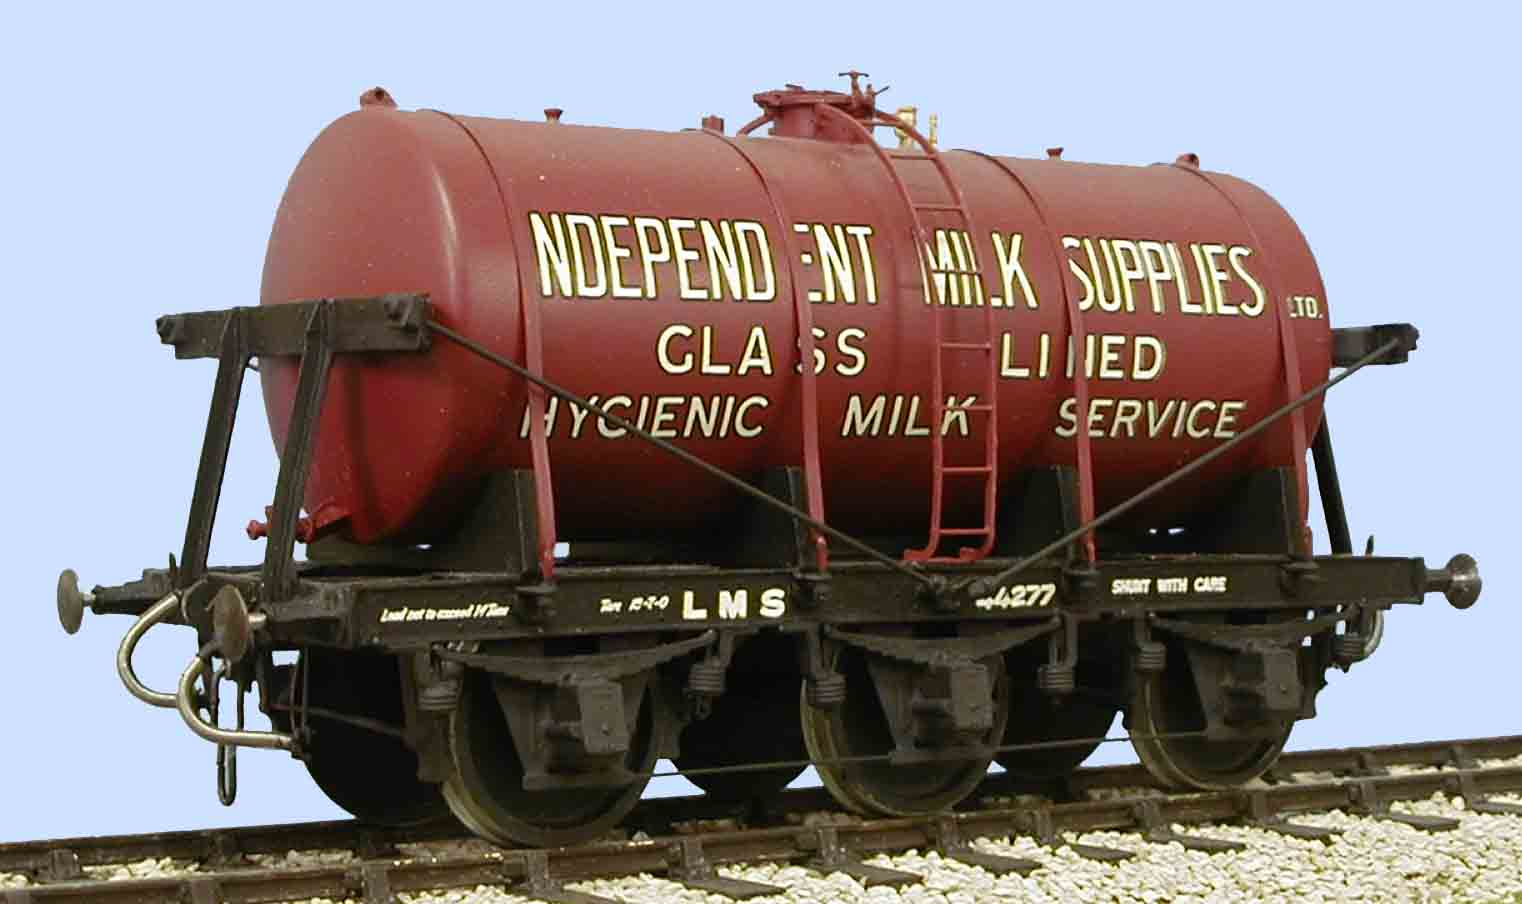 7073 with Independant Milk Supplies transfers